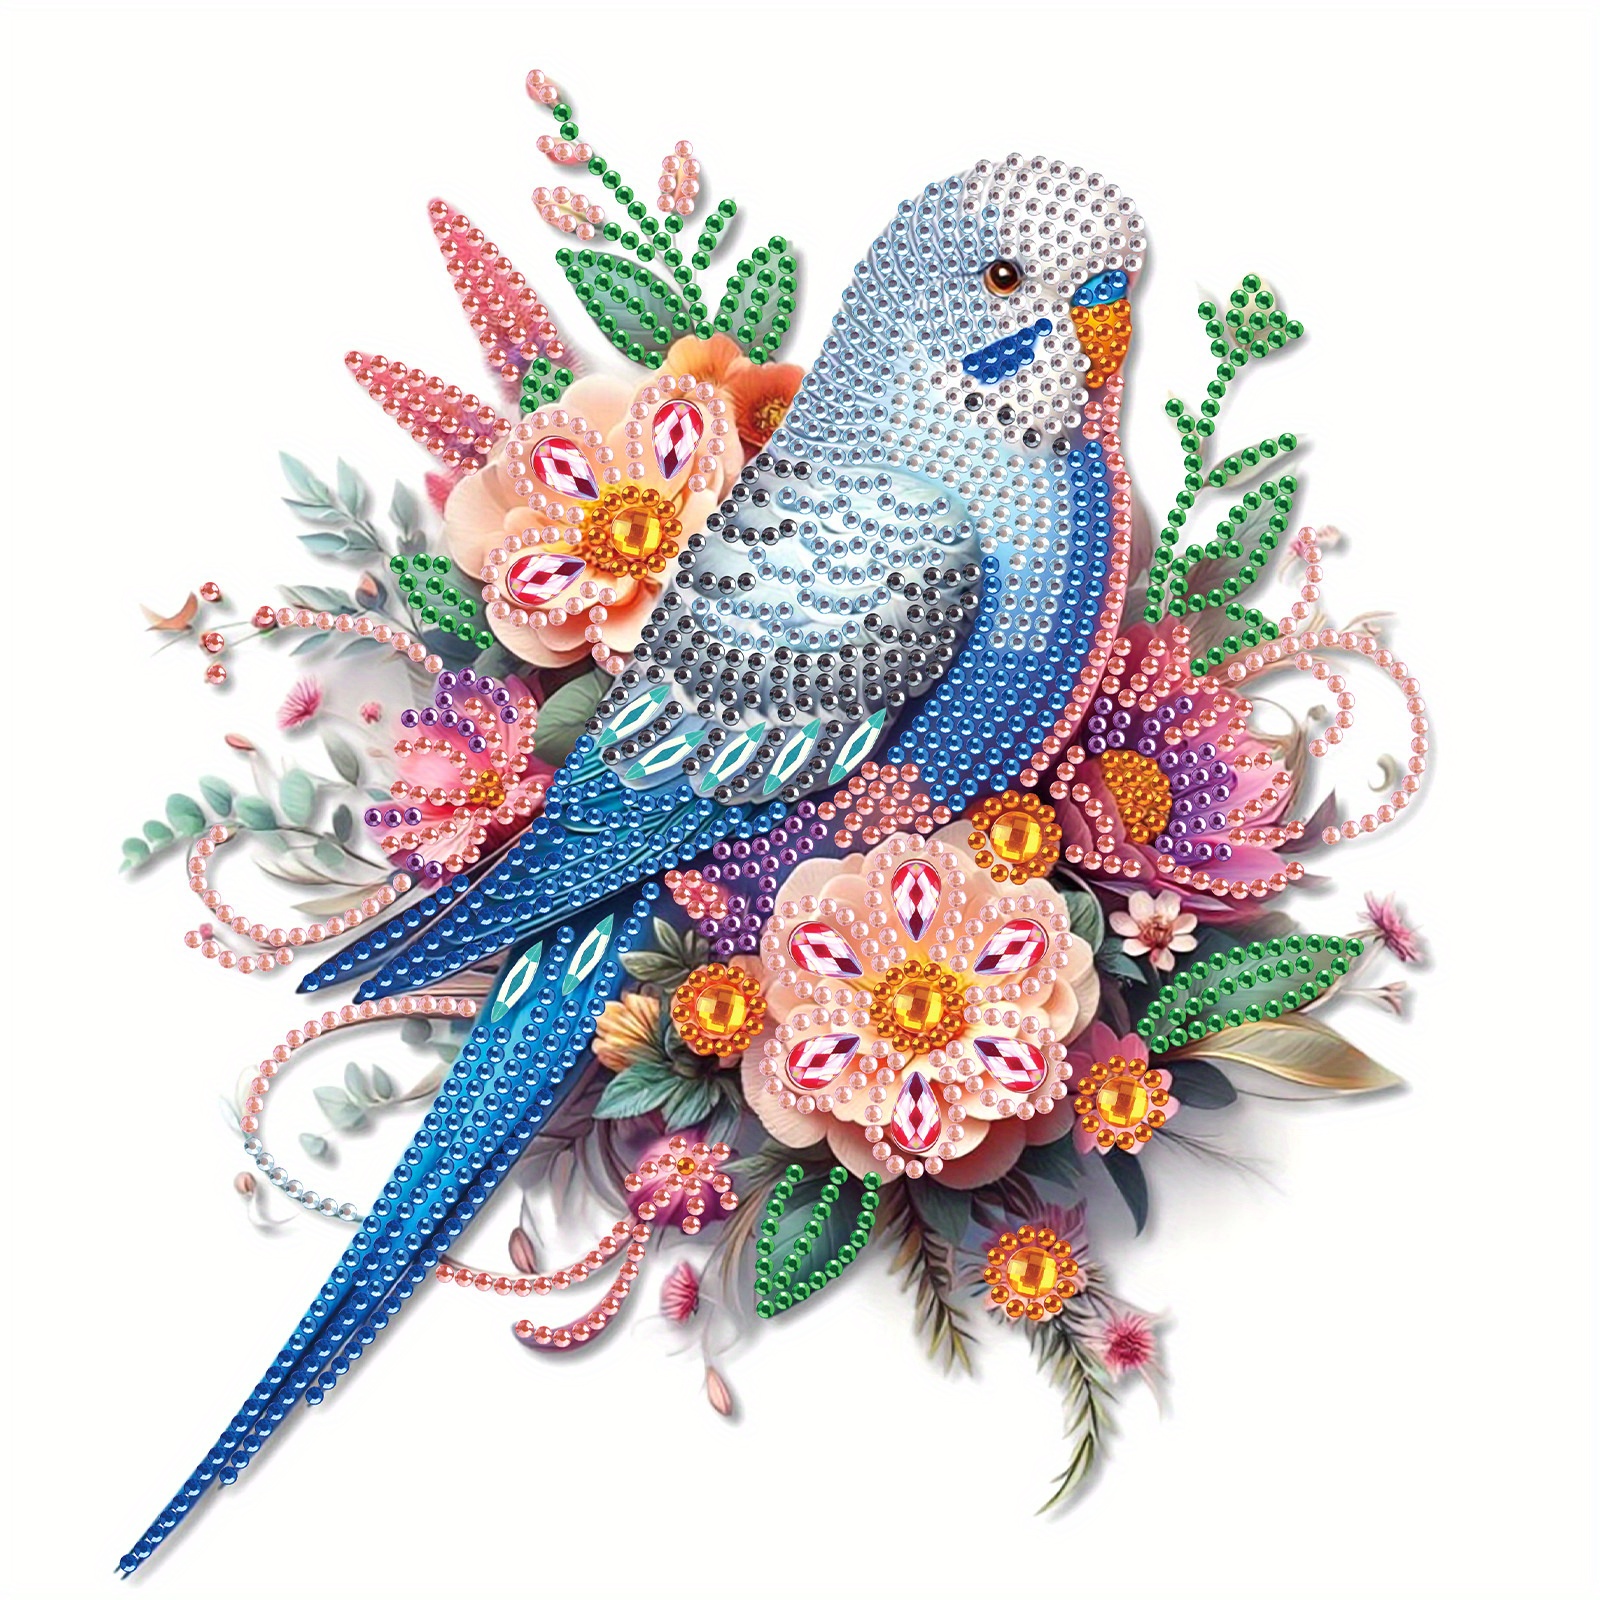 

5d Parrot Diamond Painting Kit With Special Shaped Diamonds - Animal Themed Diy Crafts Mosaic Canvas Set For Beginners And Adults - Ideal Gift And Wall Decor